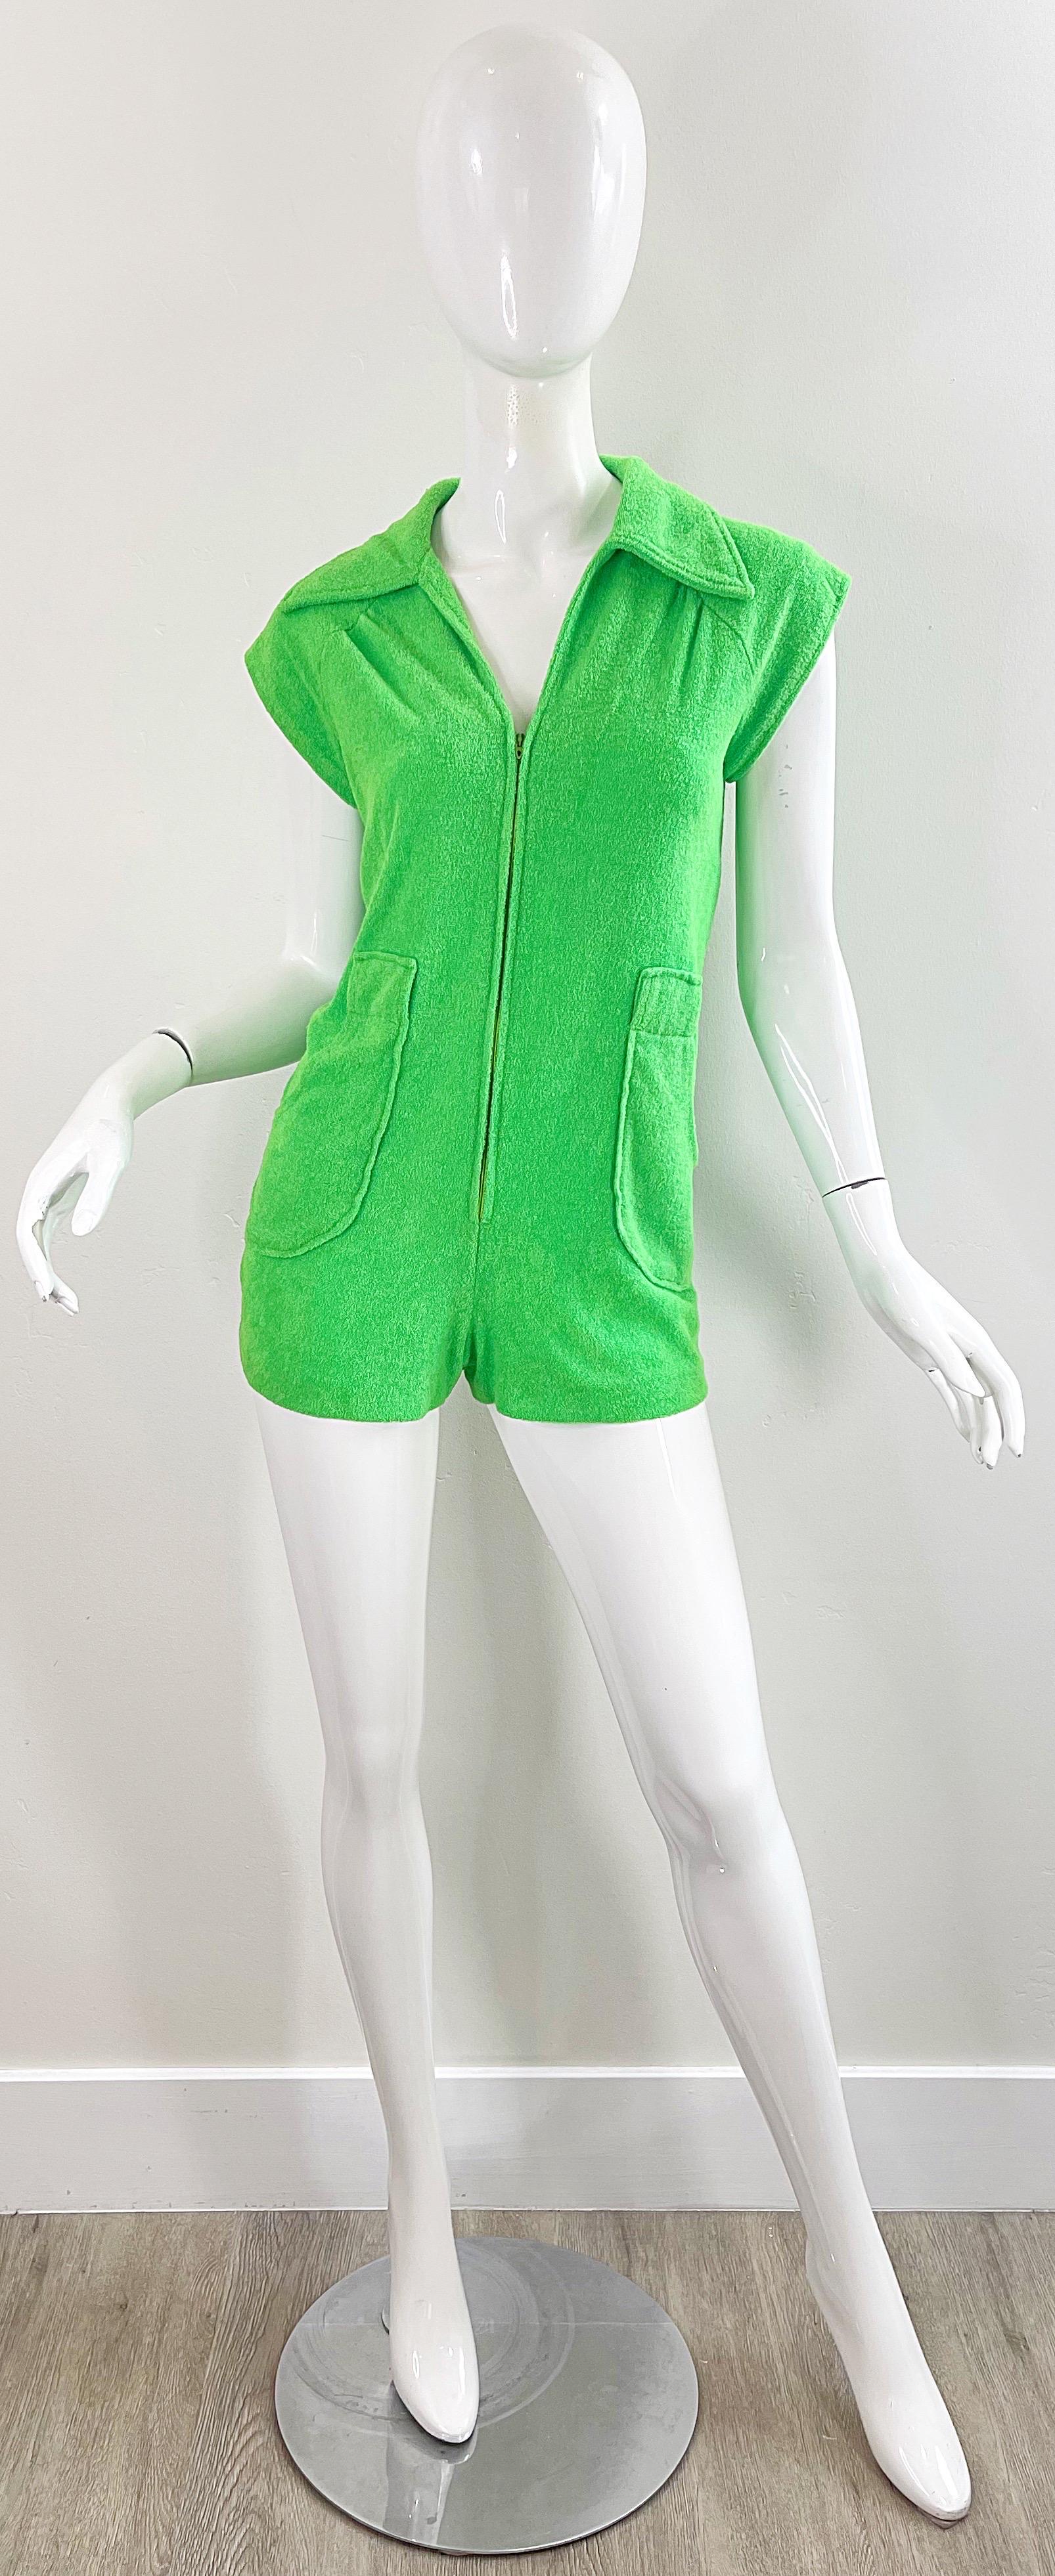 Amazing 1970s Terrycloth Neon Green Romper Vintage 70s Shorts Jumpsuit For Sale 9